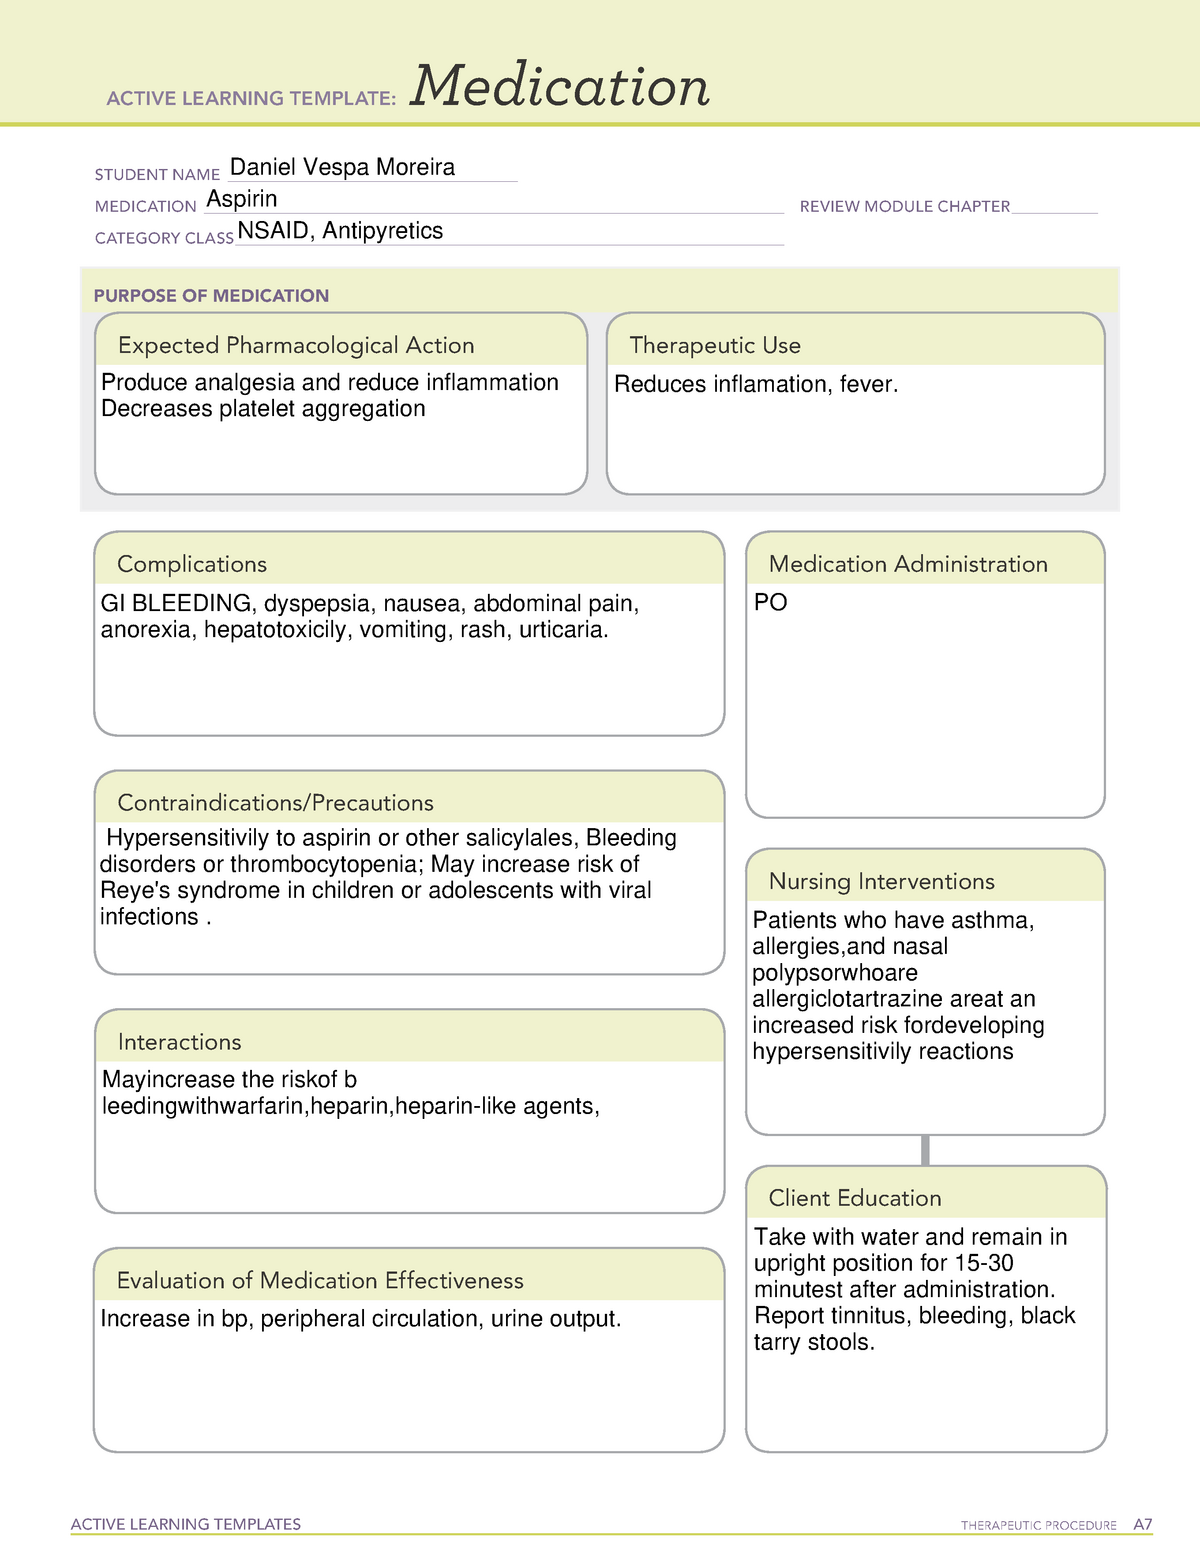 aspirin-active-learning-template-active-learning-templates